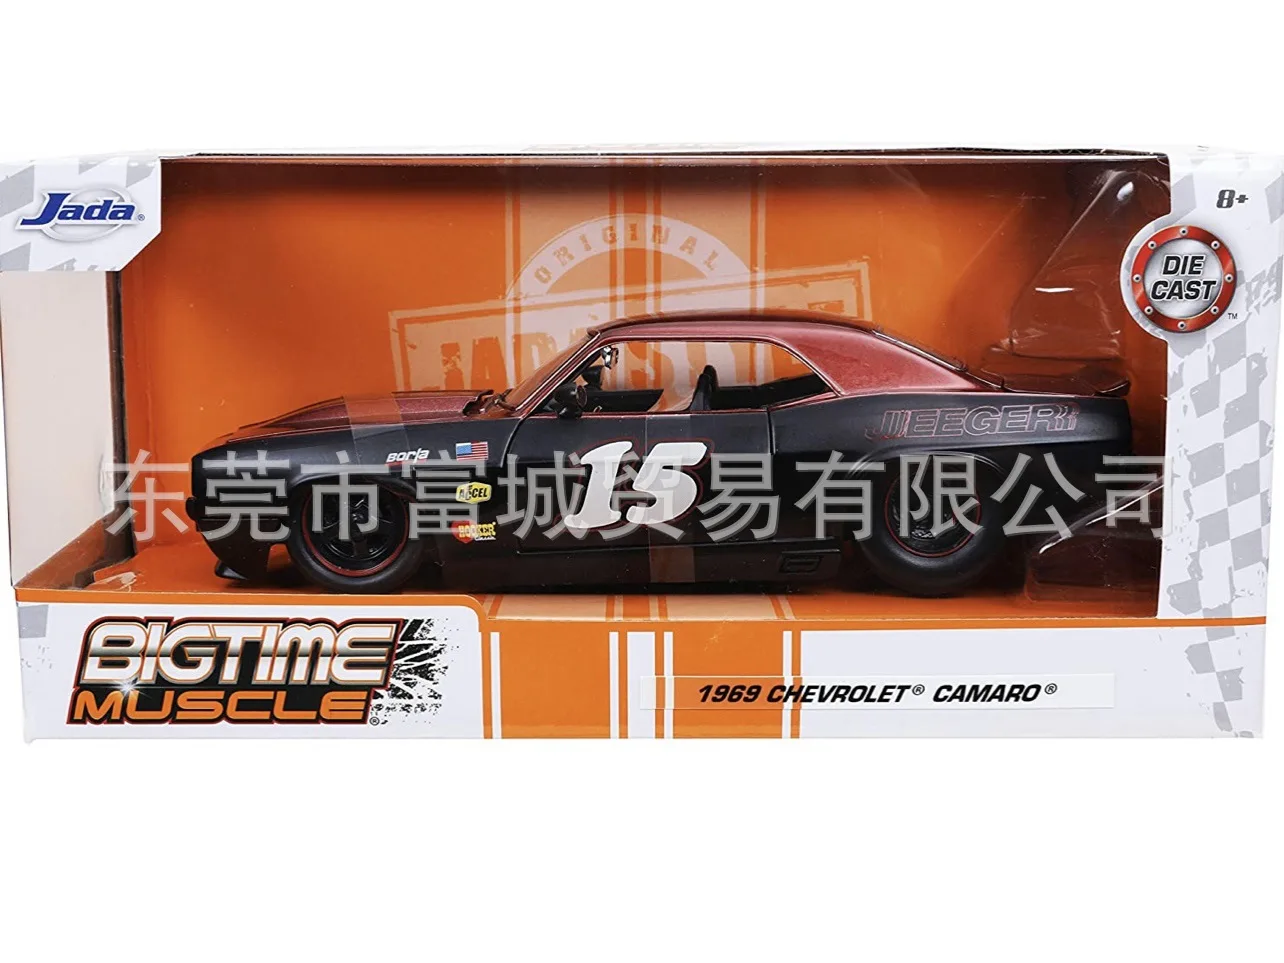 

Classics 1/24 Scale Jada Big time 1969 Chevrolet Camaro Auto Zone 37 Model Car Toy Chevy Muscle Diecast Street Racing Thumbnails